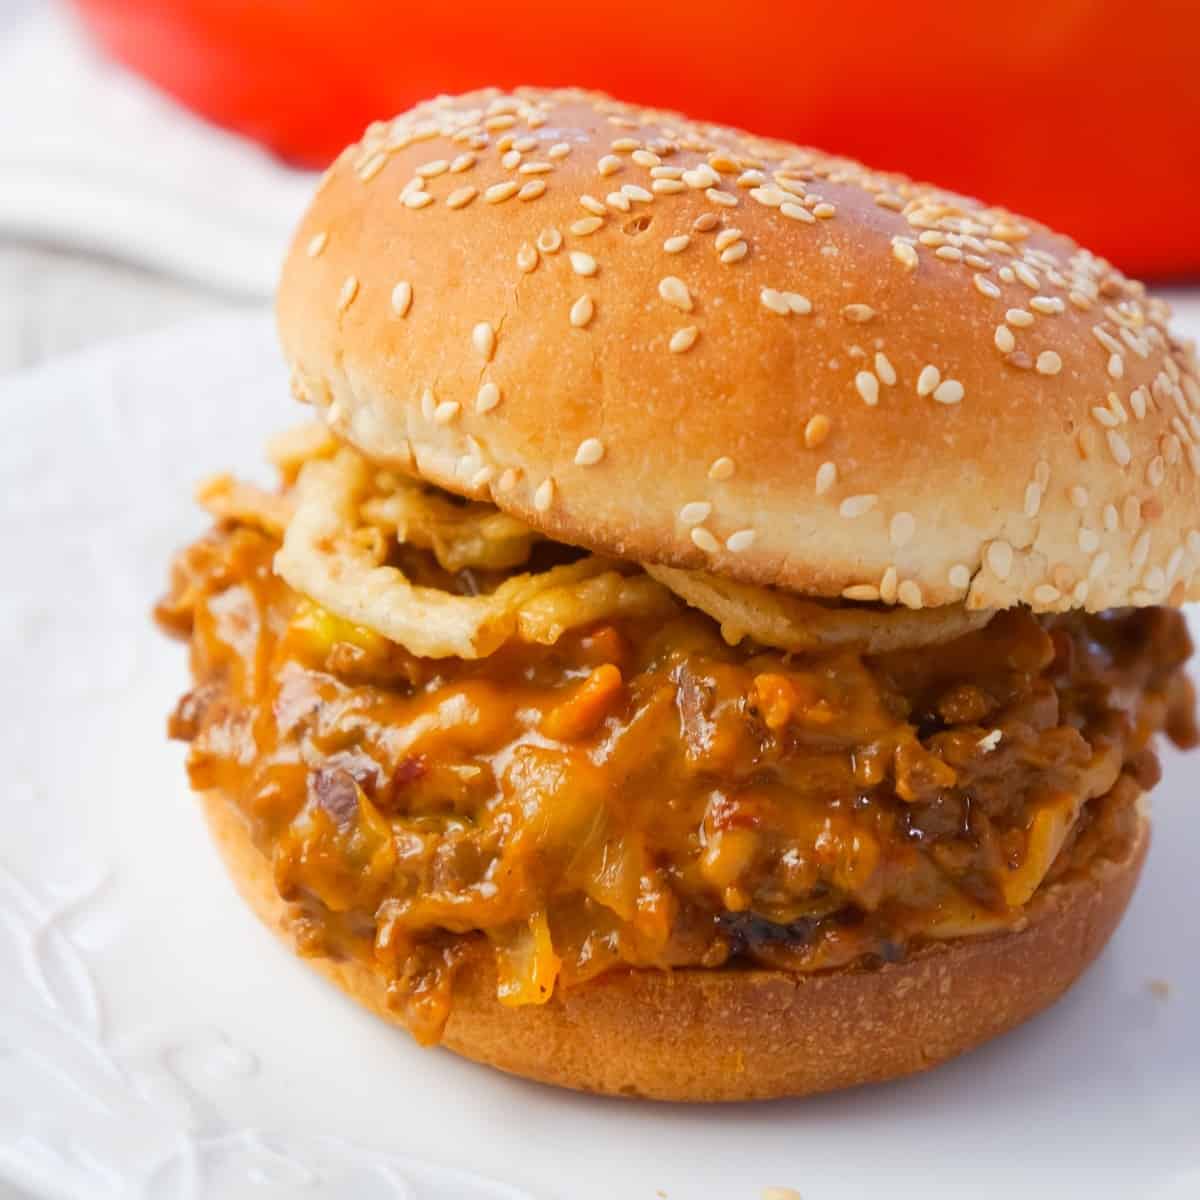 BBQ Bacon Cheeseburger Sloppy Joes are a delicious ground beef dinner loaded with crumbled bacon, BBQ sauce, salsa con queso and cheddar cheese.